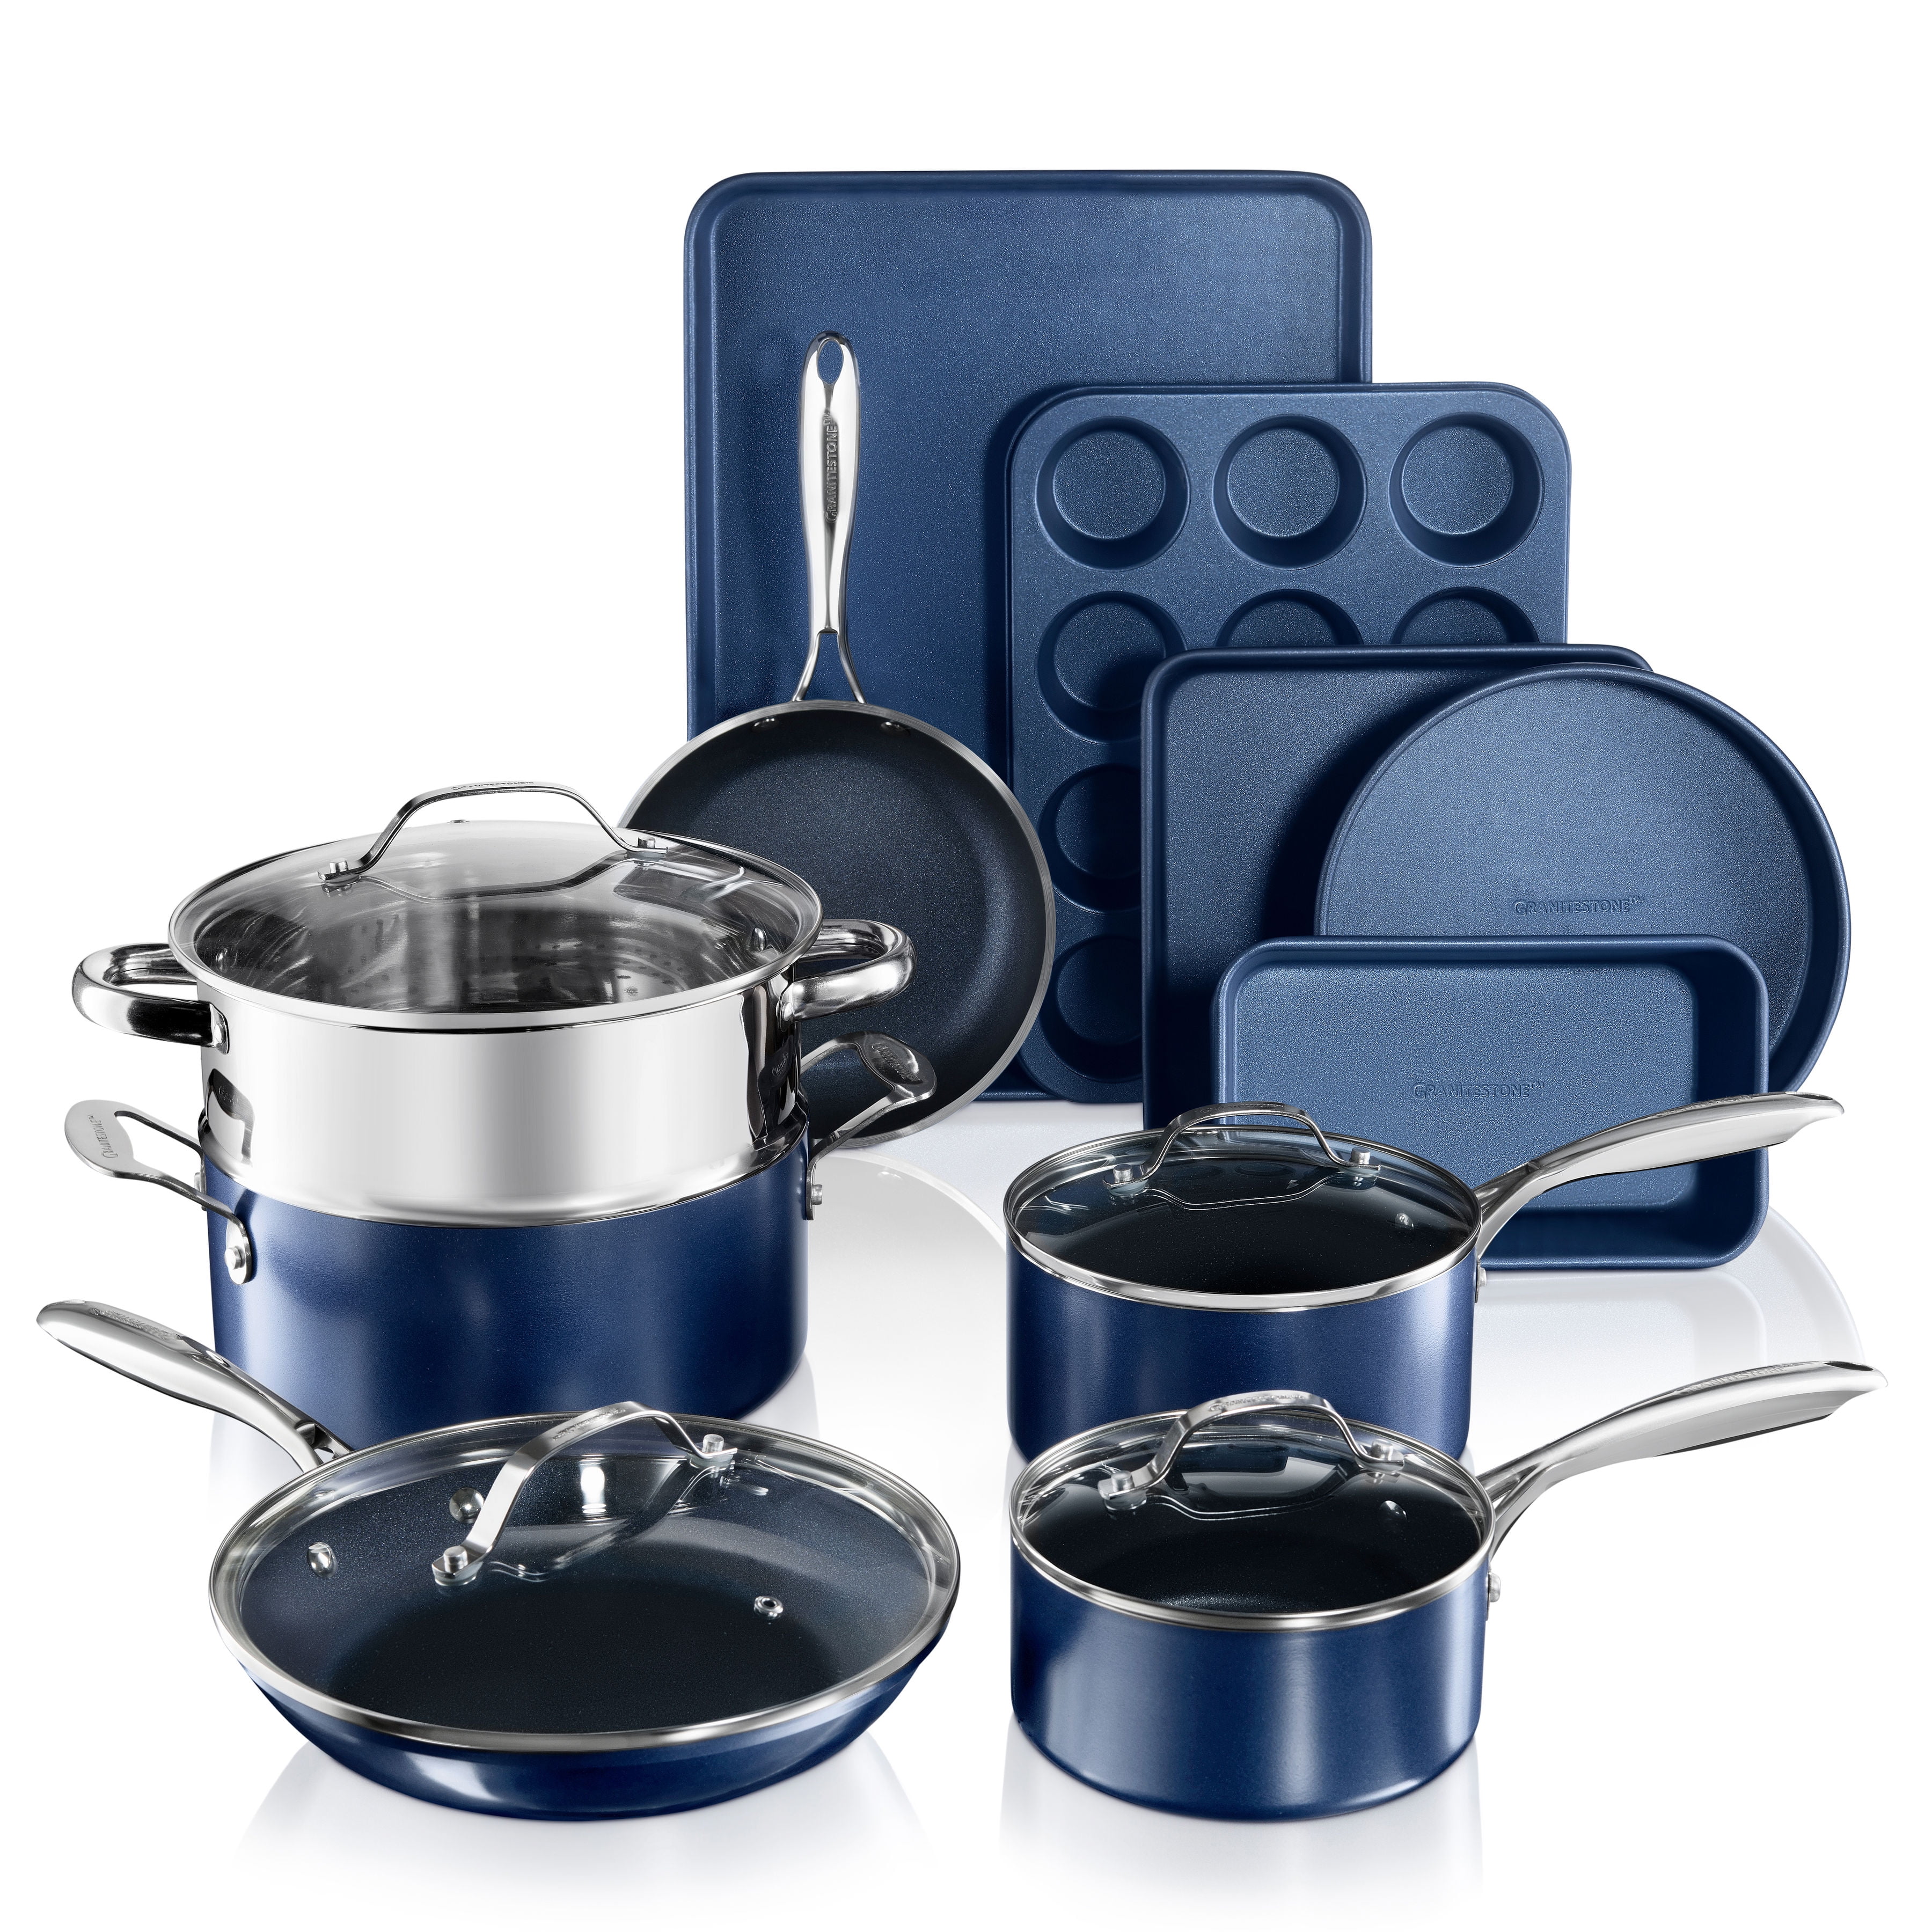 Granite Stone Classic Blue 15 Piece Pots and Pans Set, Ultra Nonstick Blue Diamond Stainless Steel Cookware